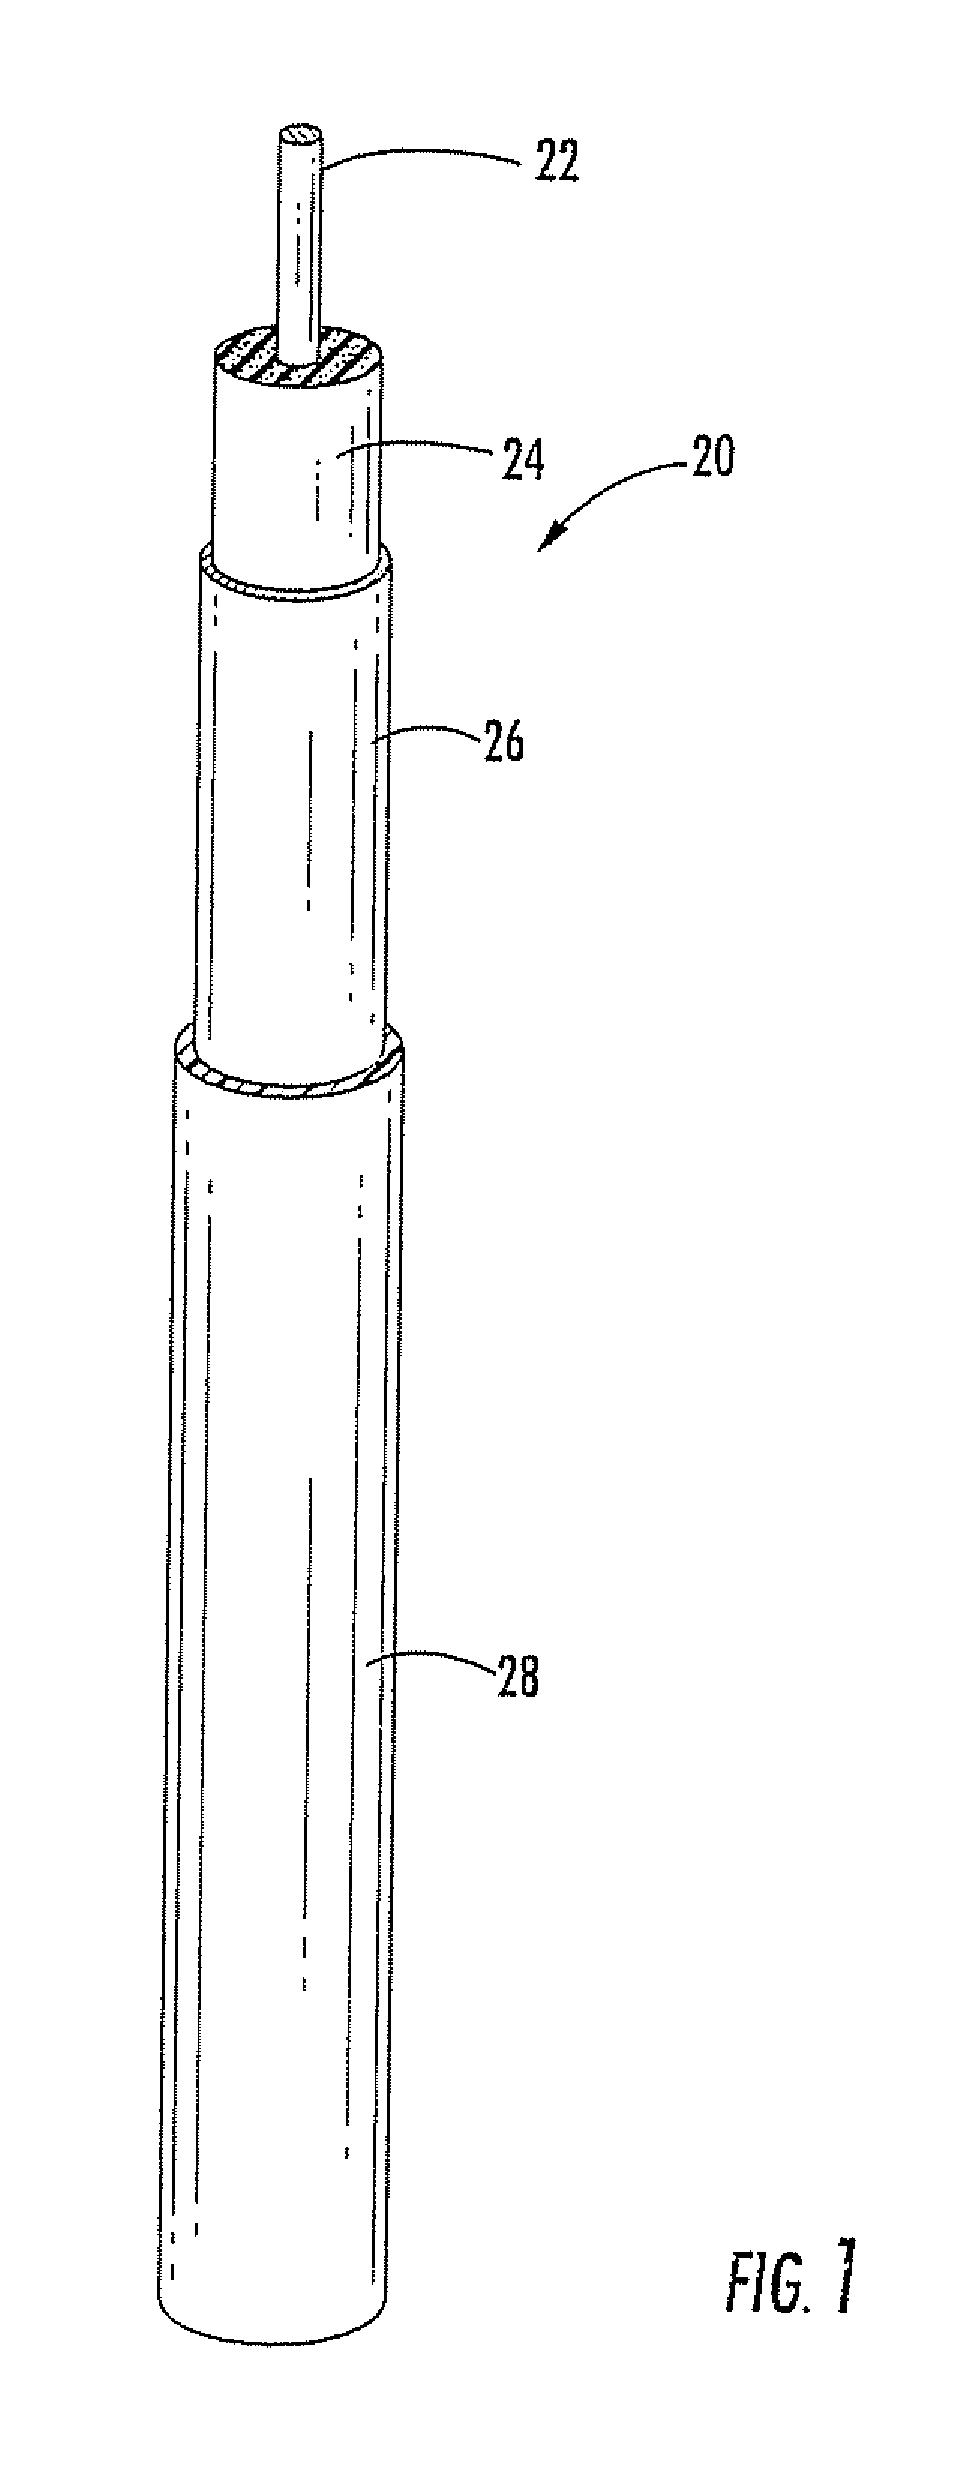 Coaxial cable having wide continuous usable bandwidth